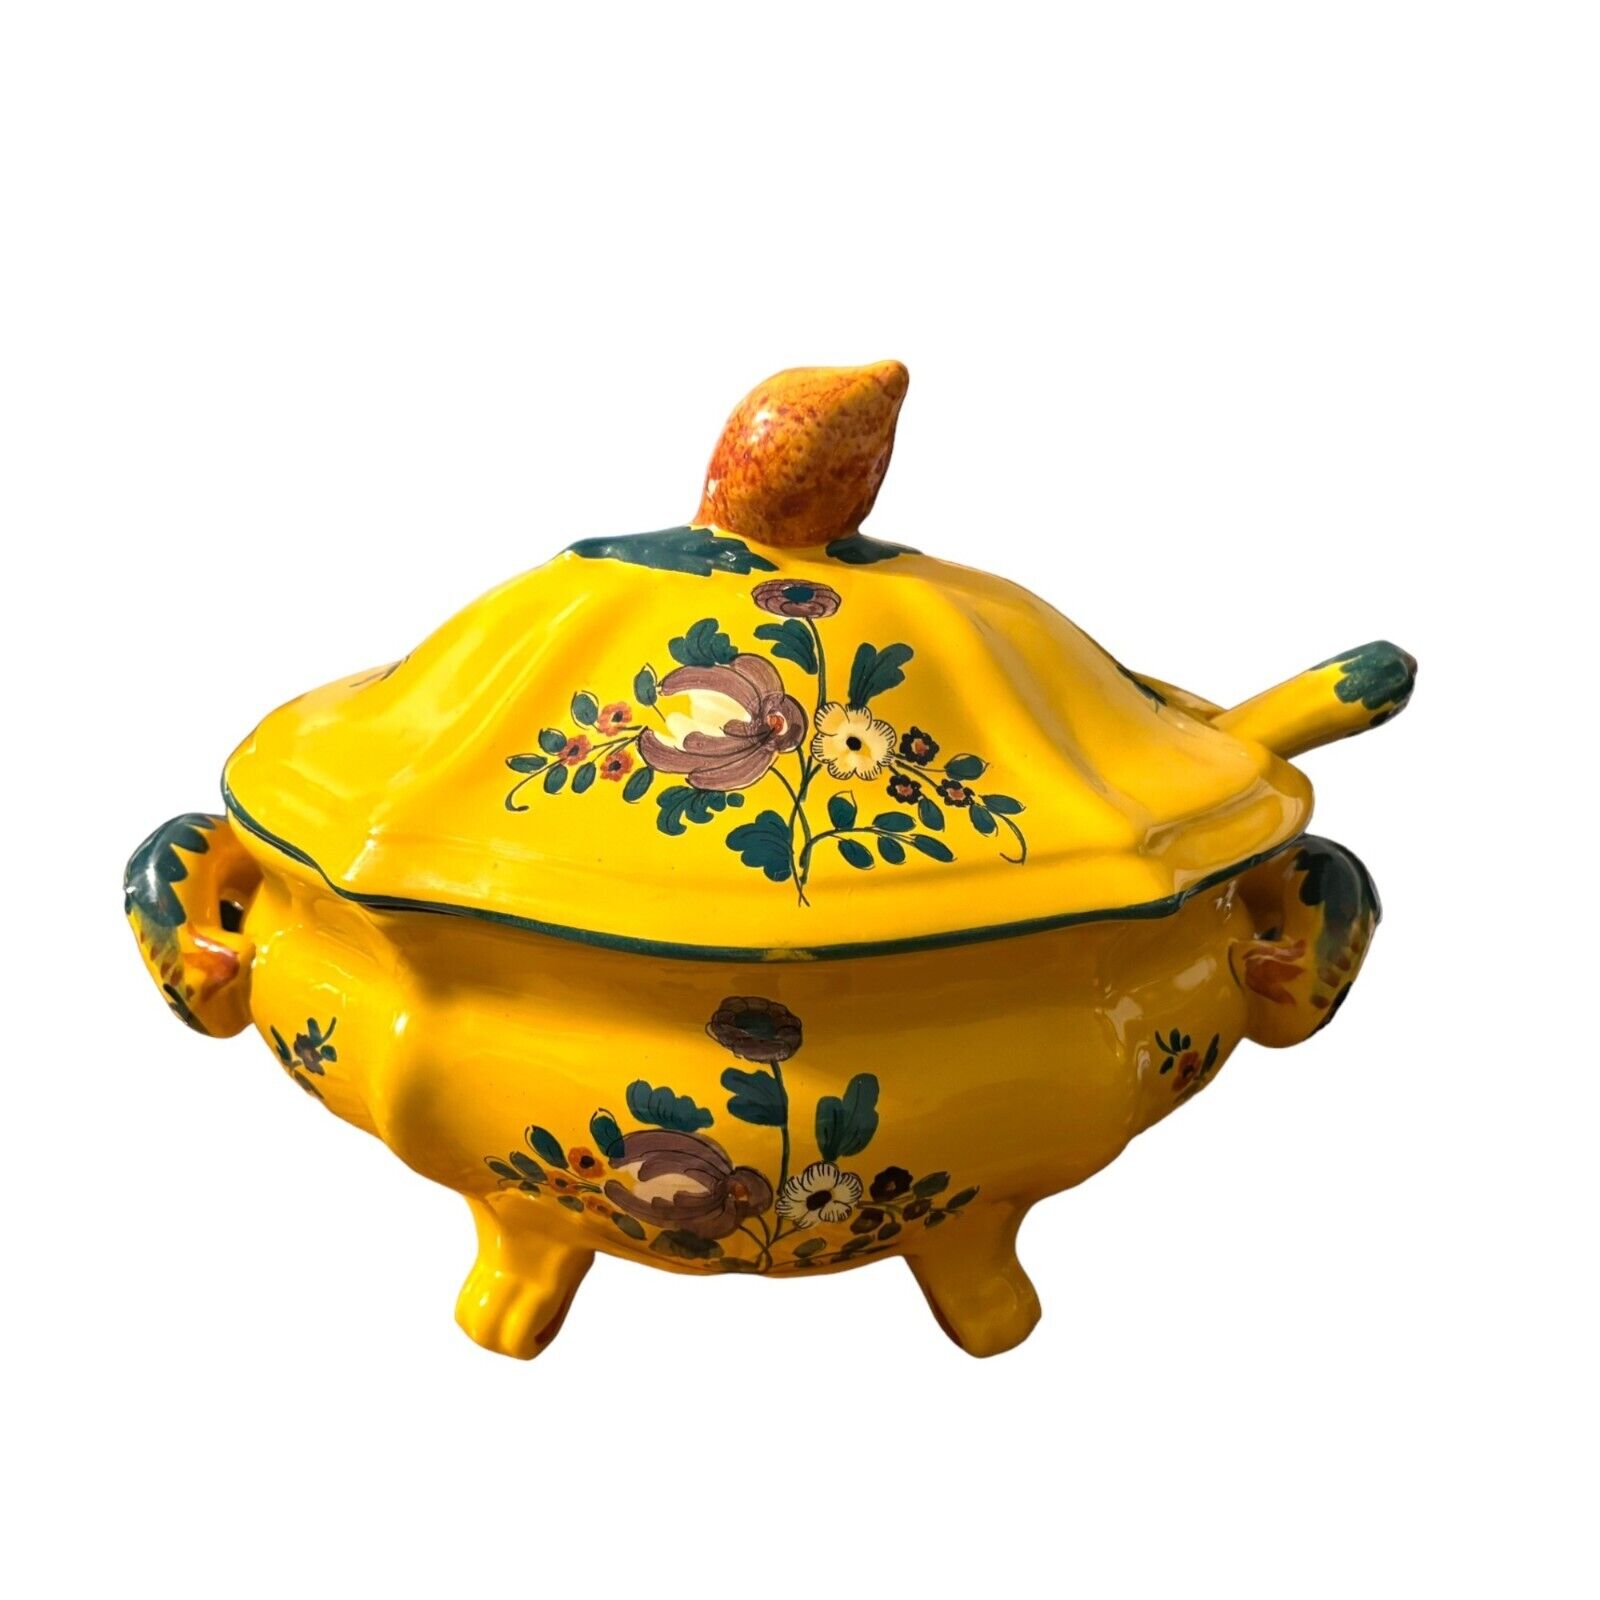 Vintage Italian Pottery Covered Soup Tureen and Ladle Yellow floral